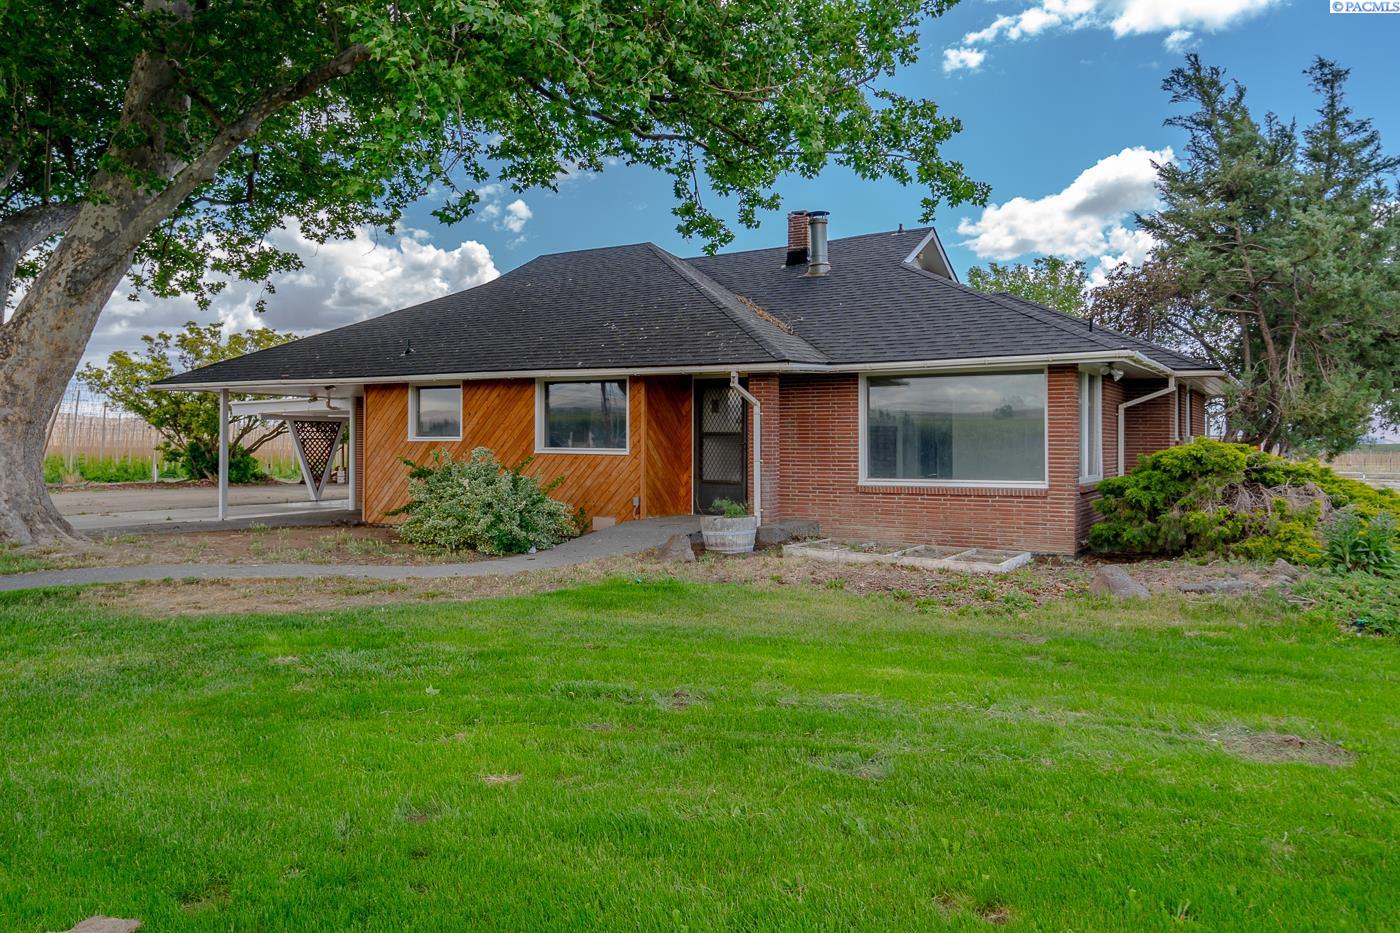 Prosser, WA Homes for Sale 500K - 600K: Listing Report | Tri-Cities